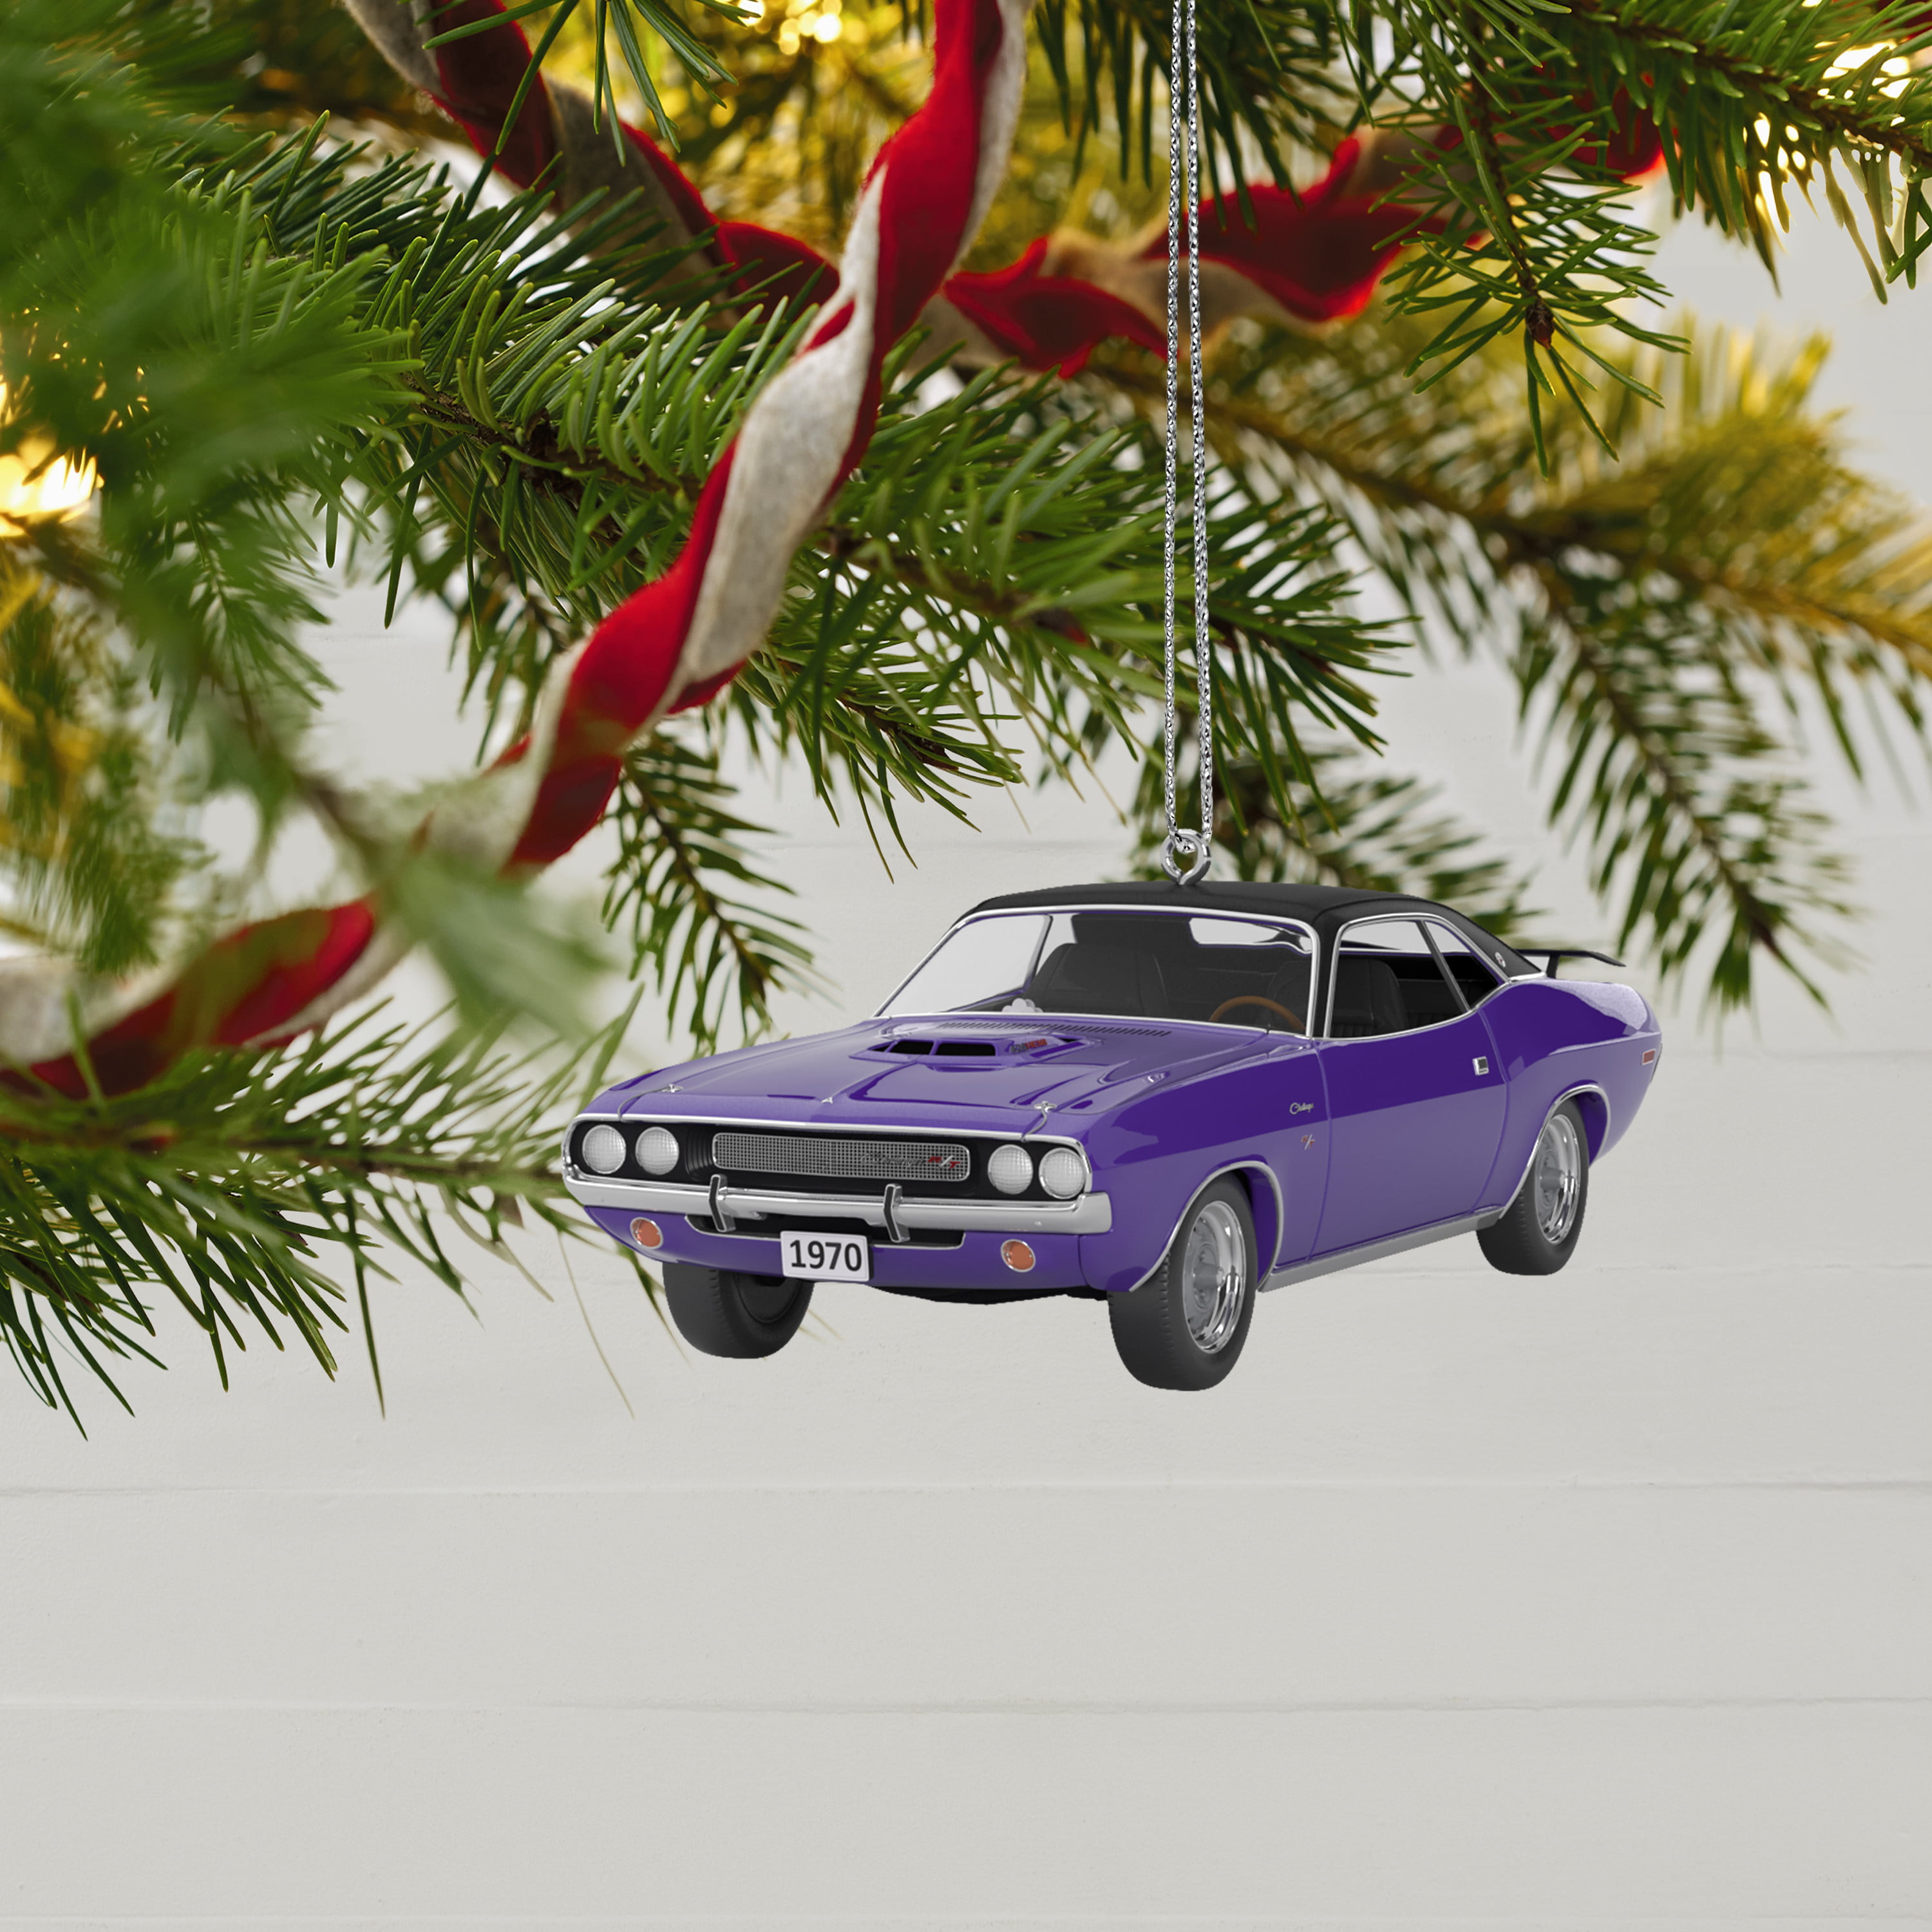 Hallmark Keepsake Christmas Ornament 2021, The Car's The Star The Fast and  The Furious 1970 Dodge Charger, Metal